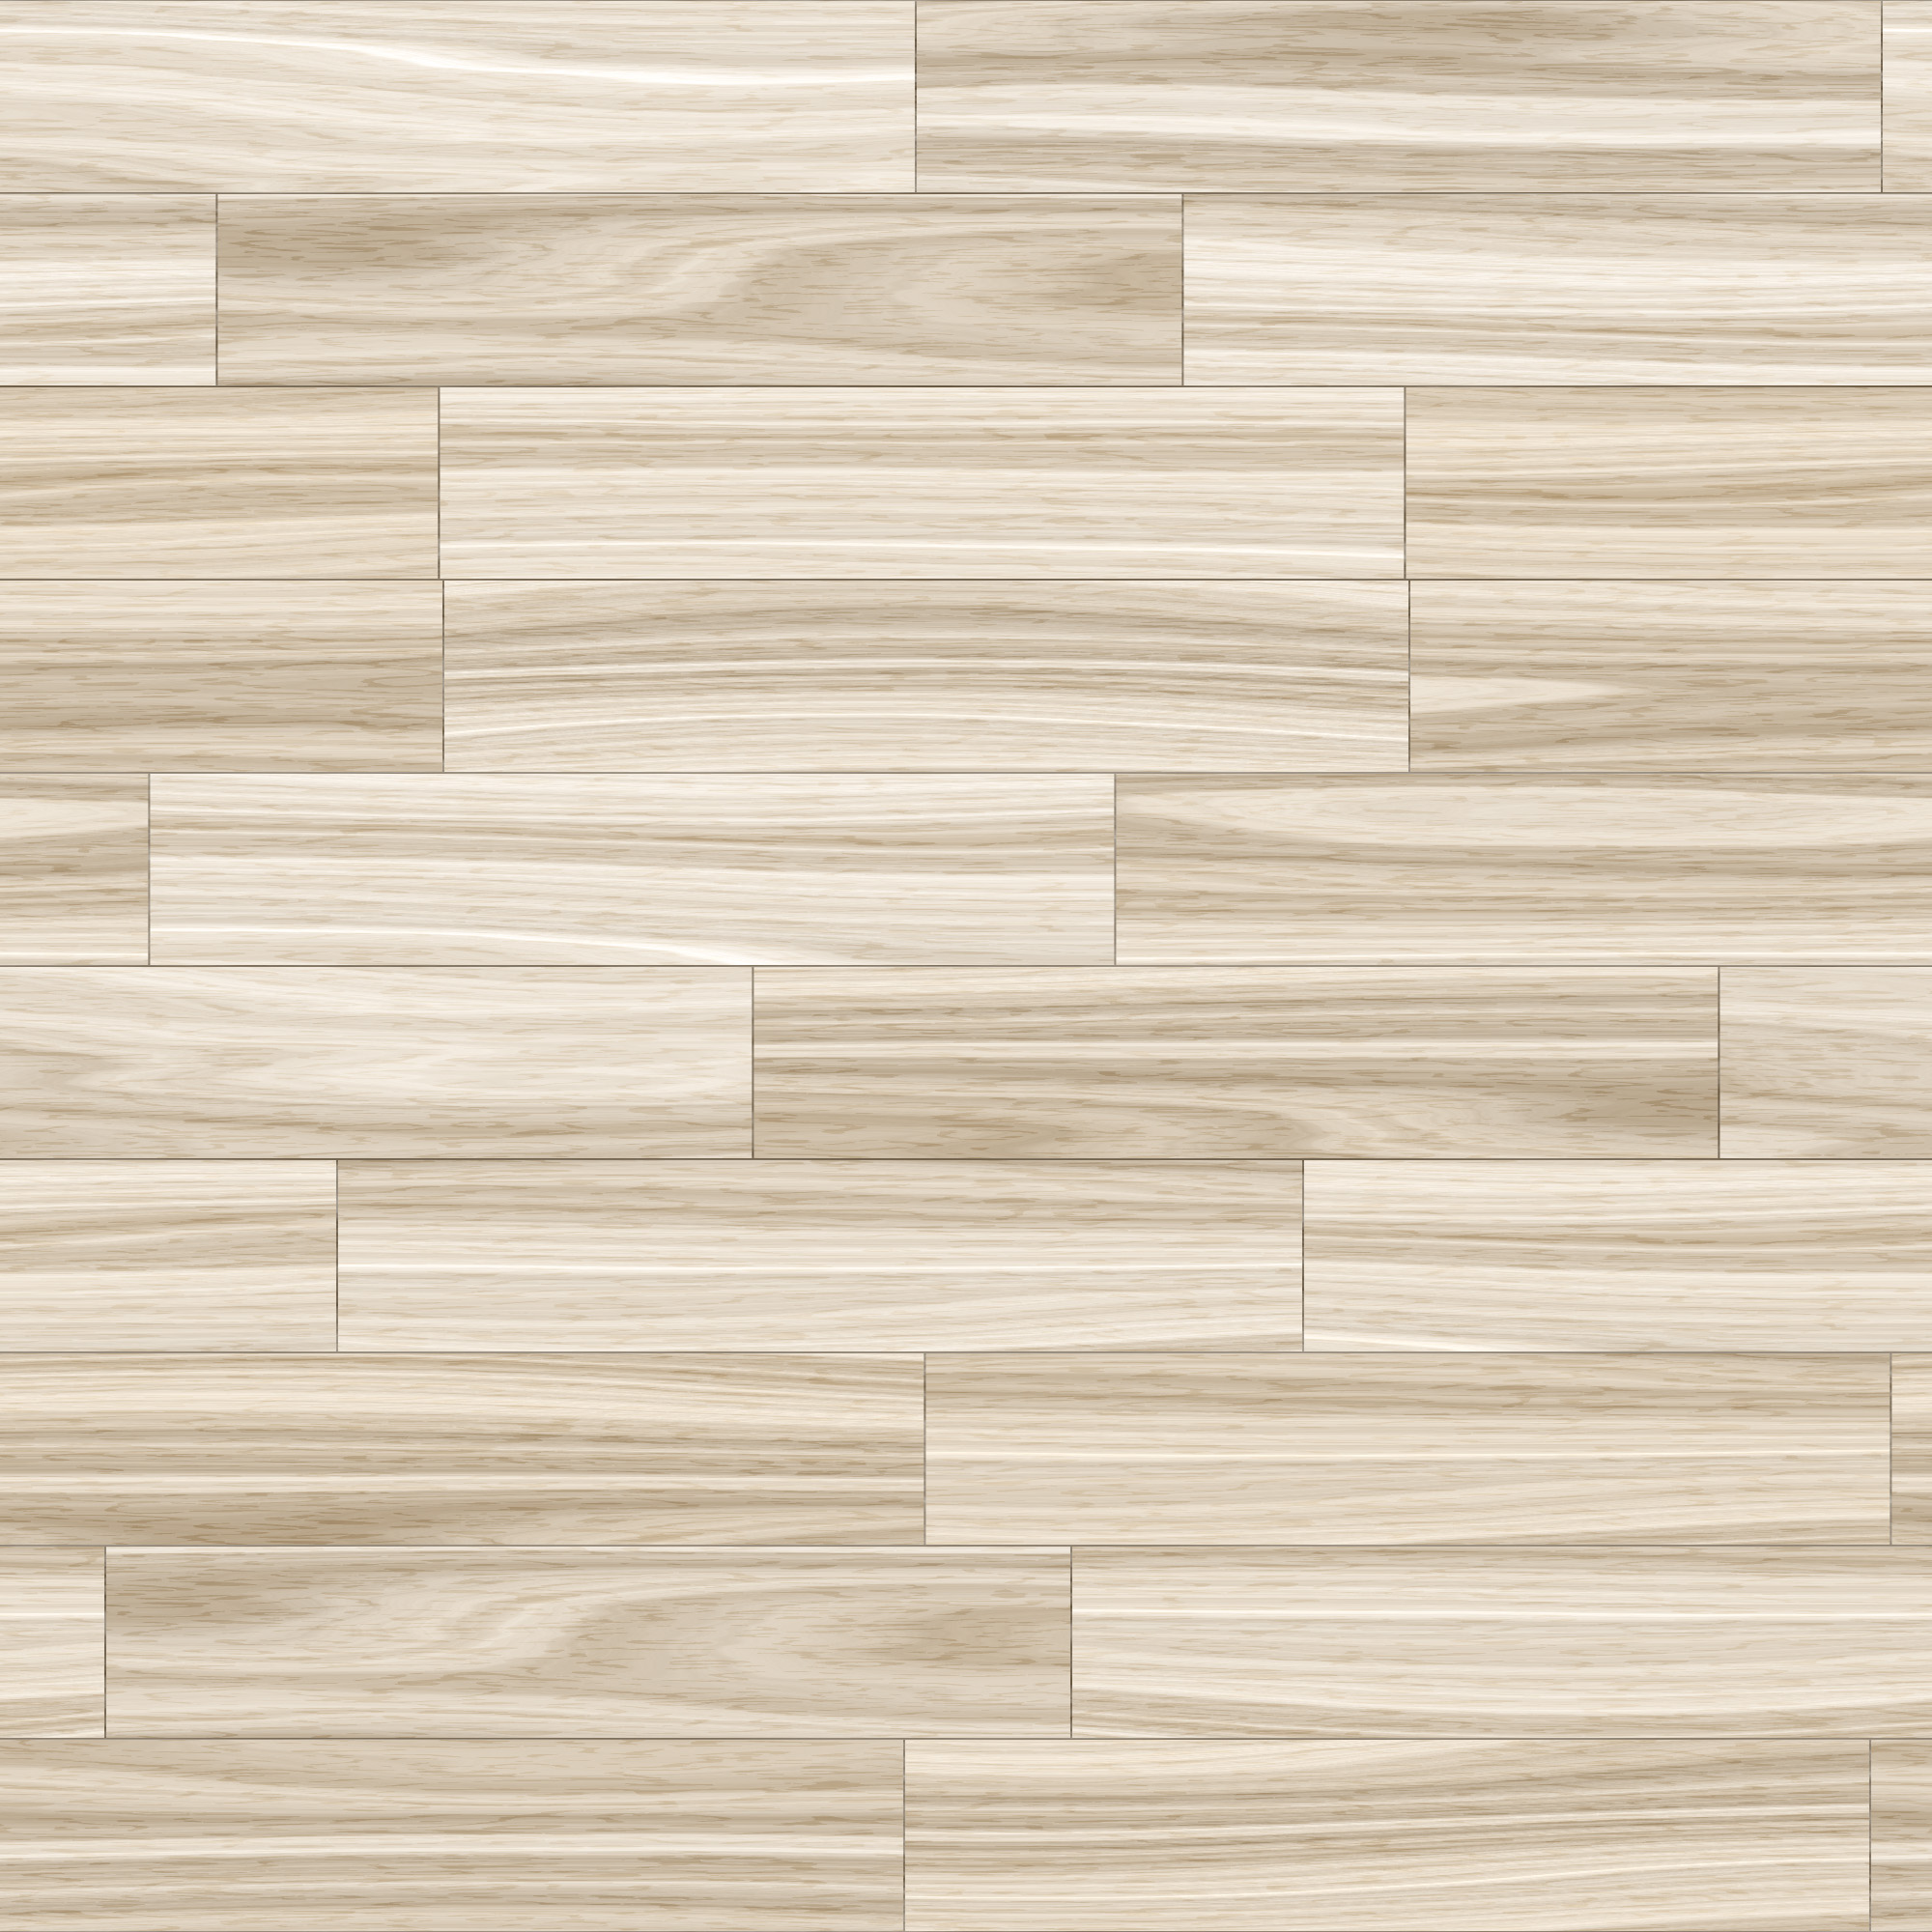 seamless wood texture for photoshop